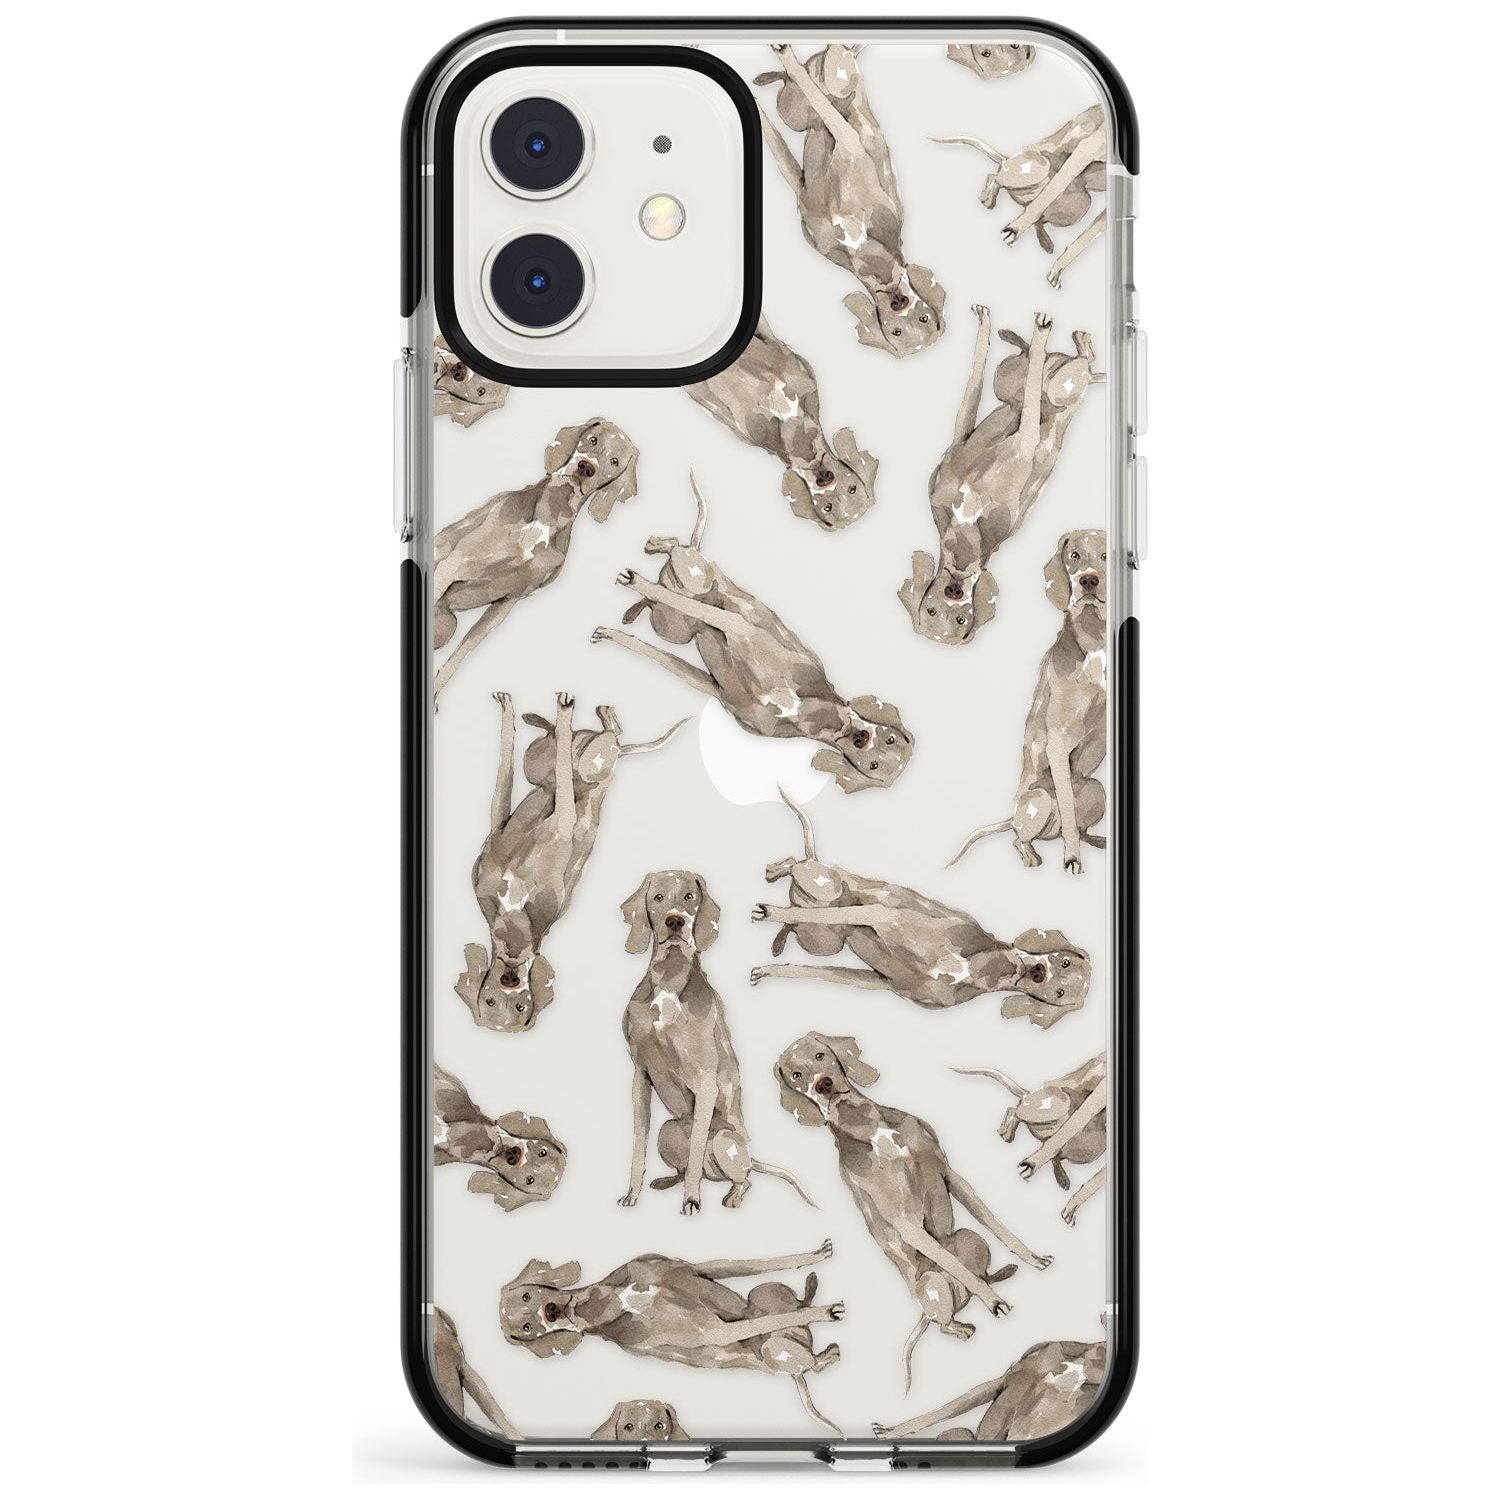 Weimaraner Watercolour Dog Pattern Black Impact Phone Case for iPhone 11